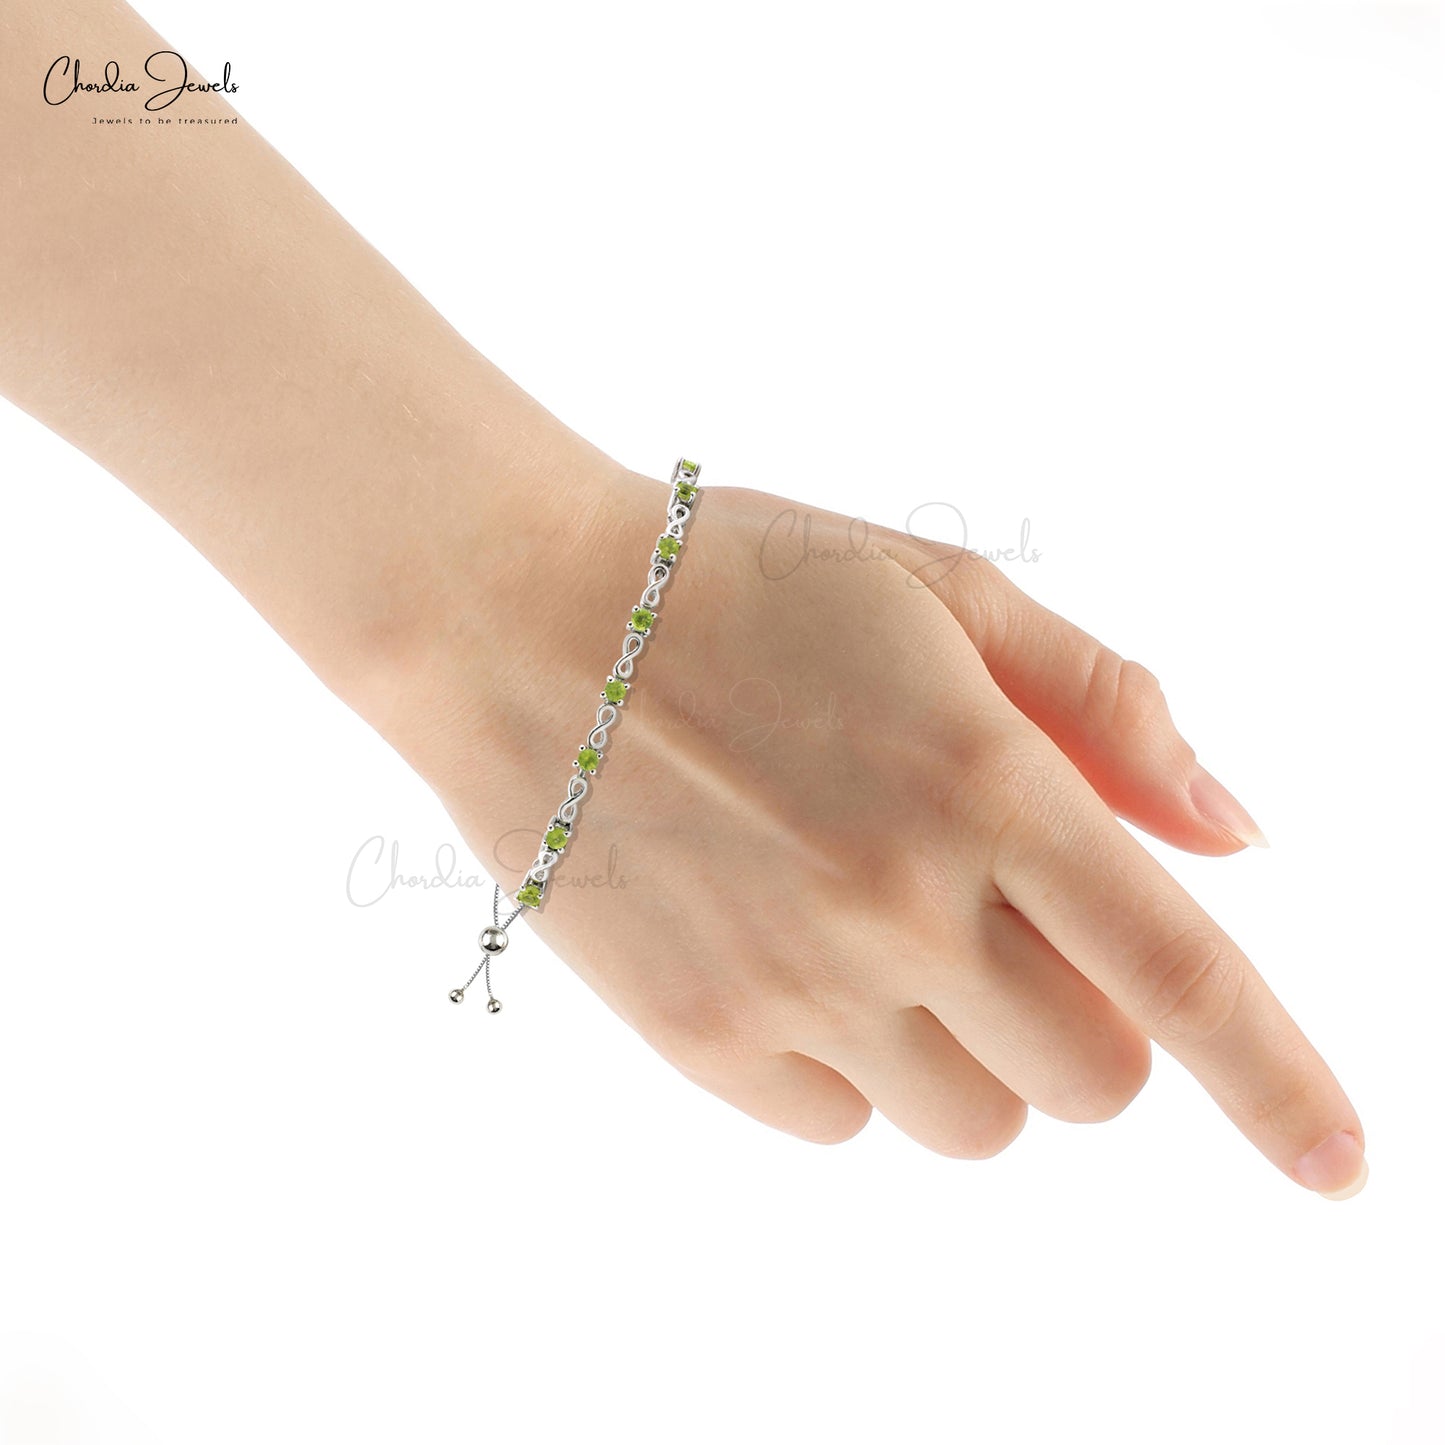 Load image into Gallery viewer, Hot Selling 925 Sterling Silver Jewelry At Offer Price Genuine Peridot Tennis Bracelet 2.5MM Round Cut Gemstone Jewelry
